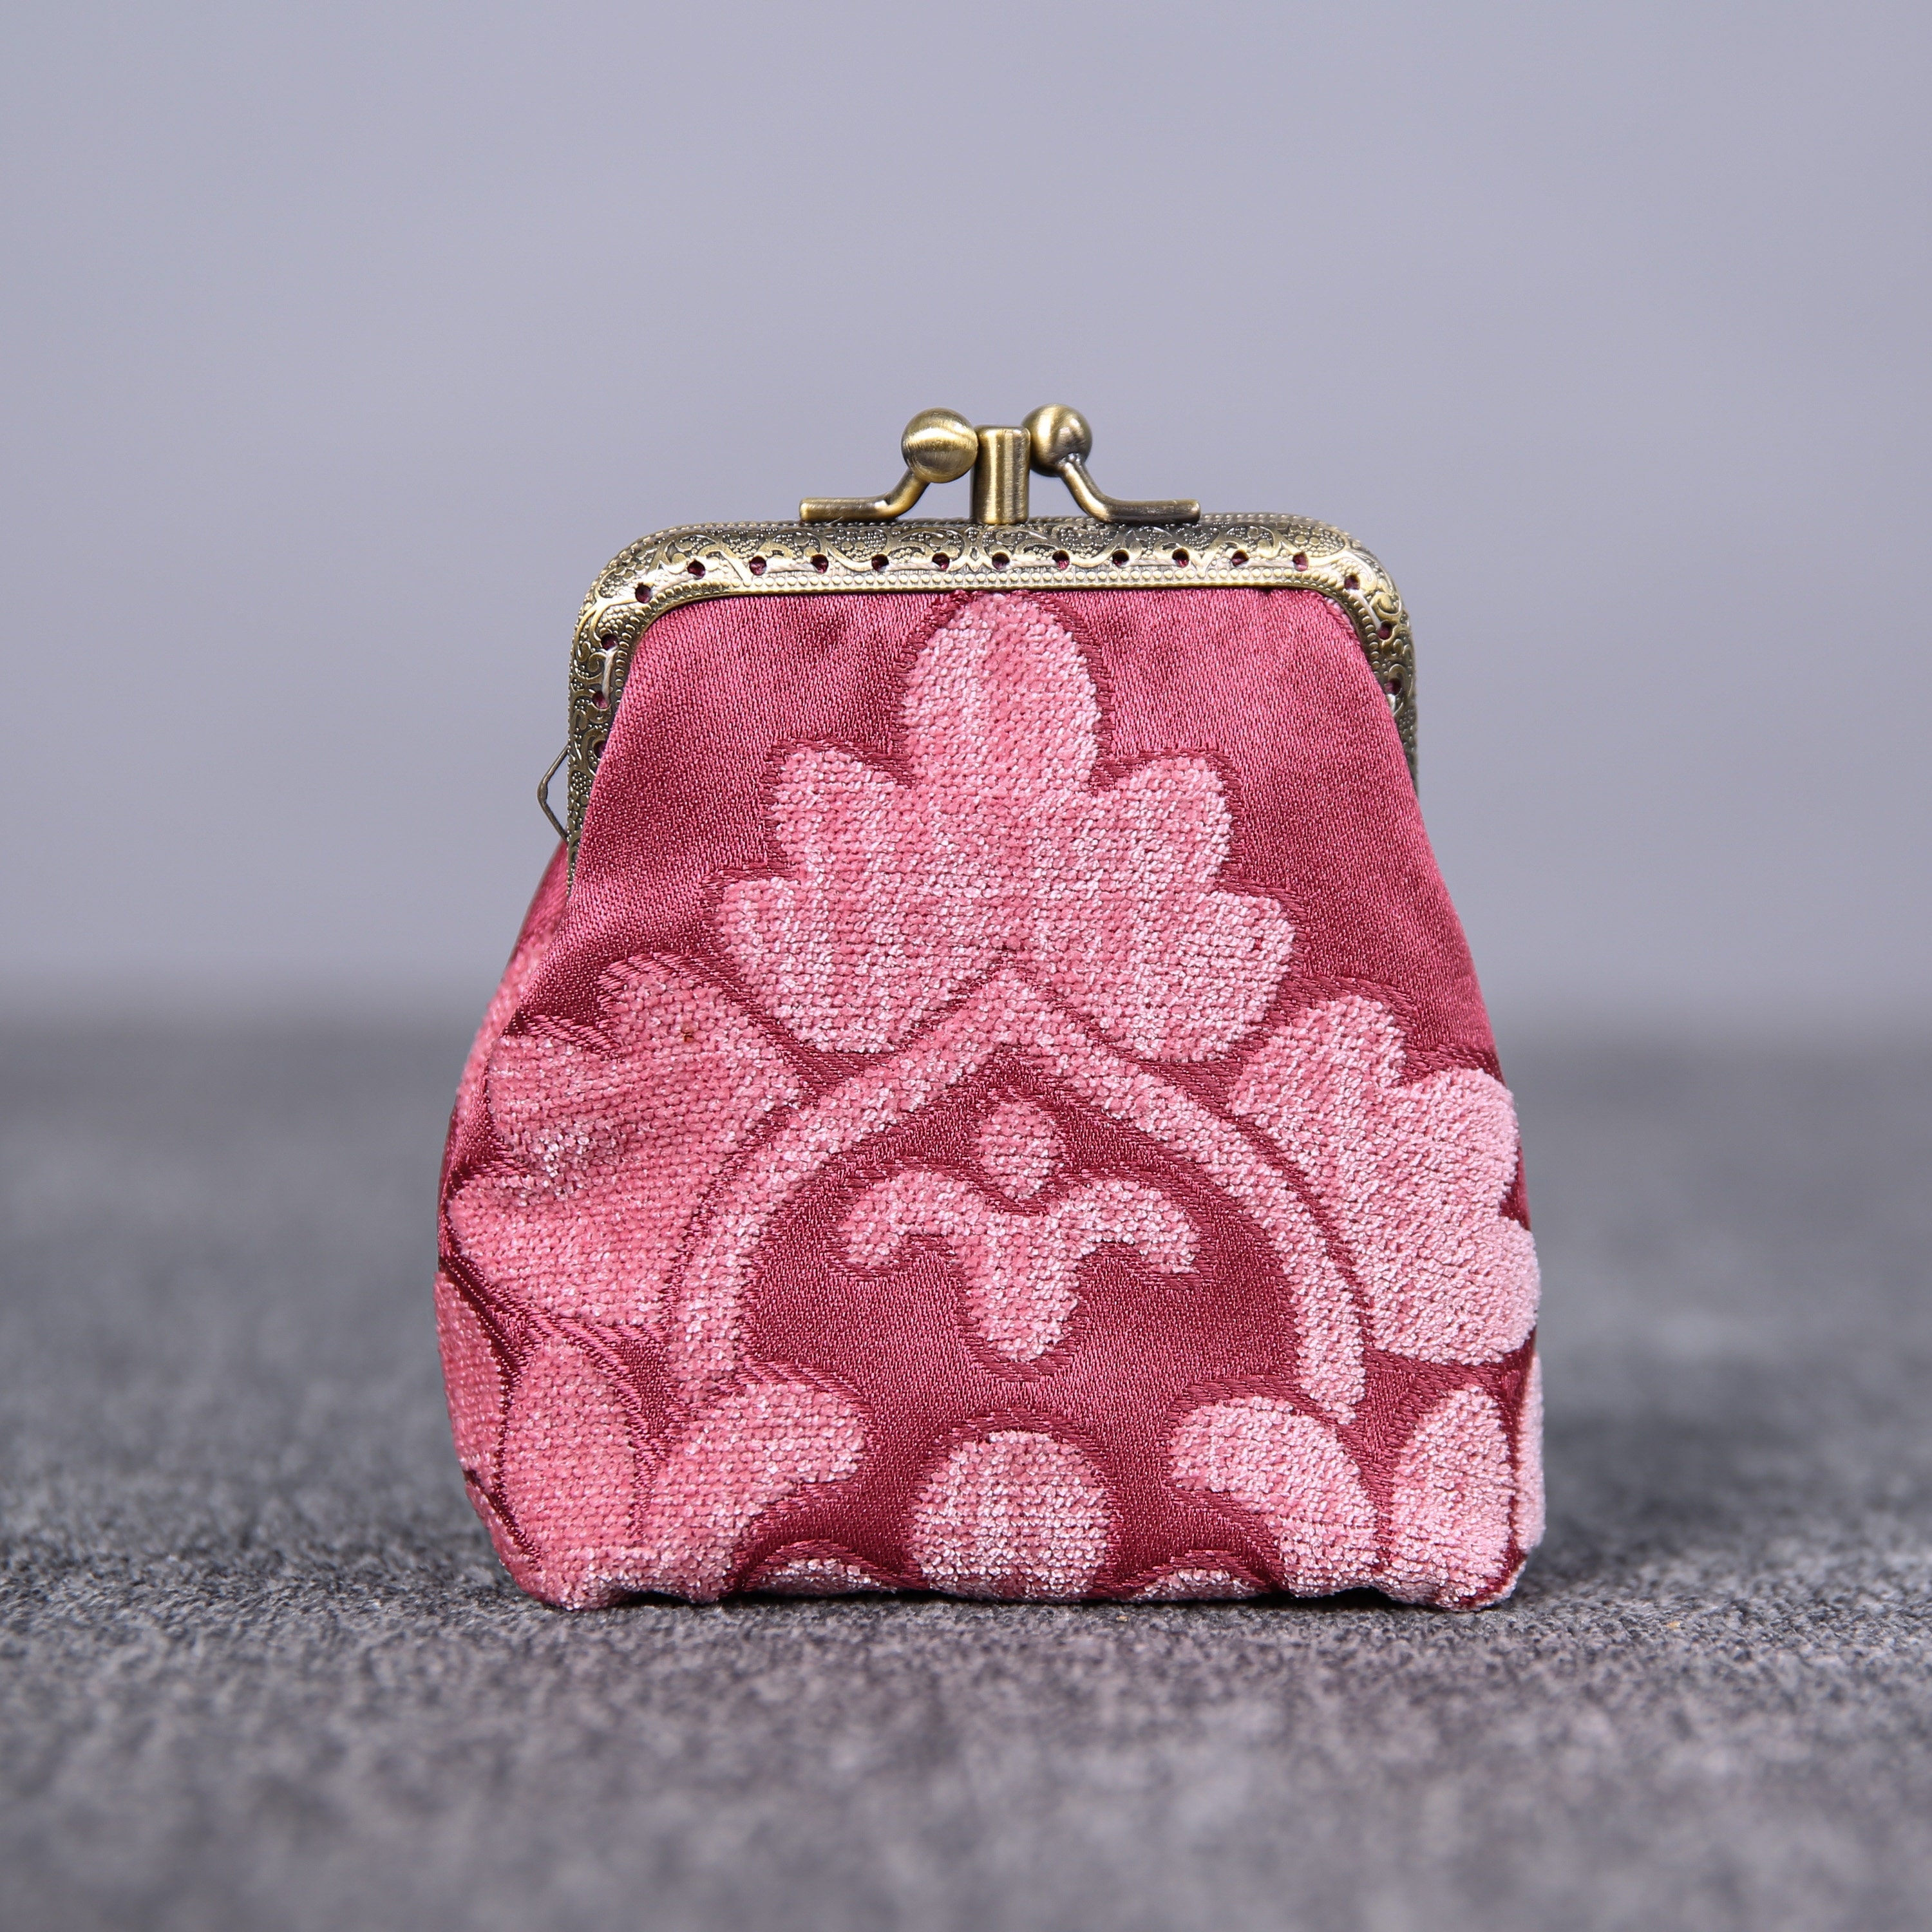 Vintage Handsewn Carpet Coin Purse Victorian Double Kiss Lock Card Pouch  Ball Clasp Bag Bridesmaid gift for her Rose Series Avocado